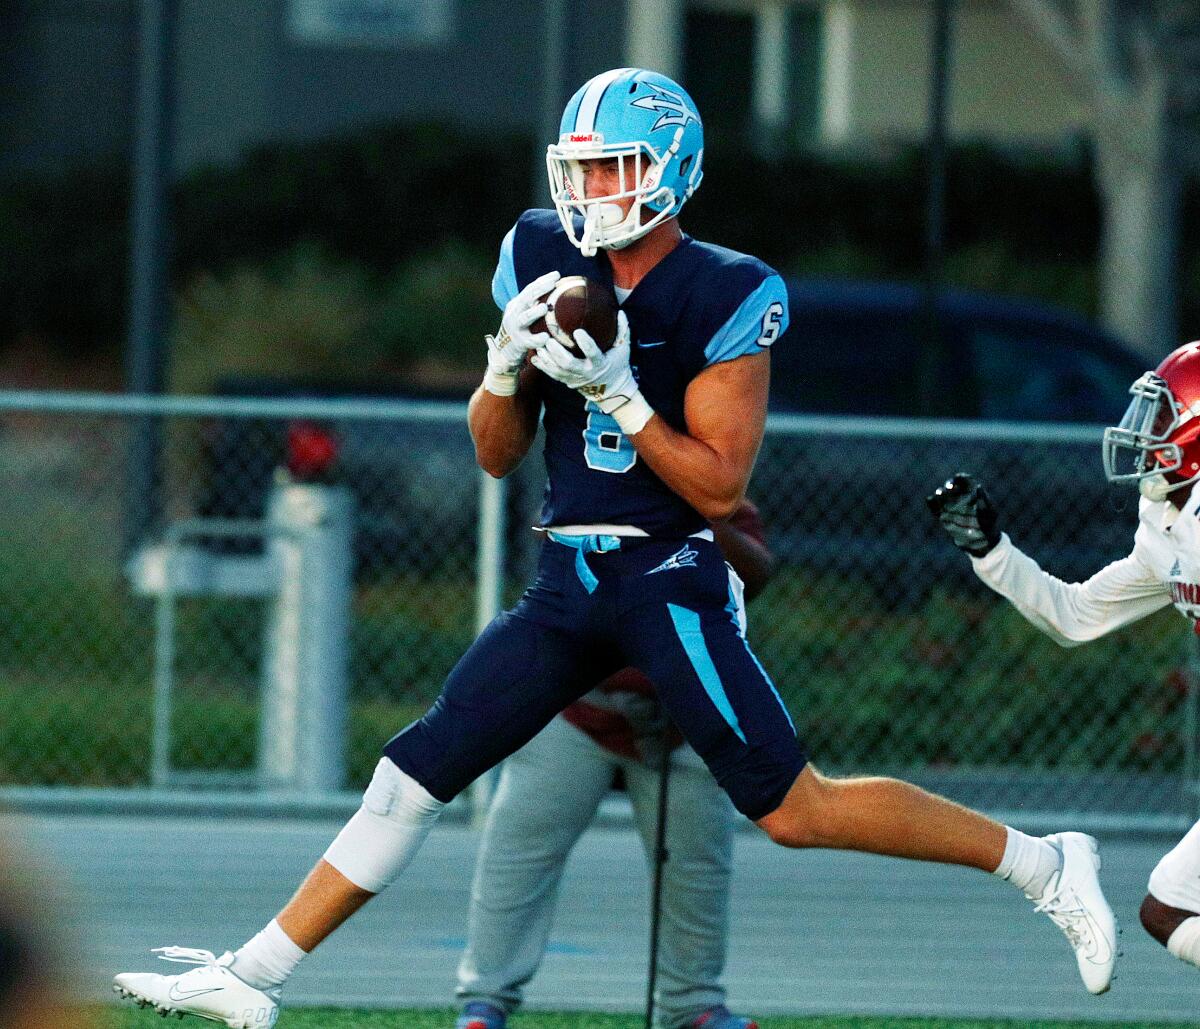 John Humphreys of Corona del Mar catches a nine-yard touchdown pass 70 seconds into Friday's nonleague game against Lakewood at Newport Harbor High.